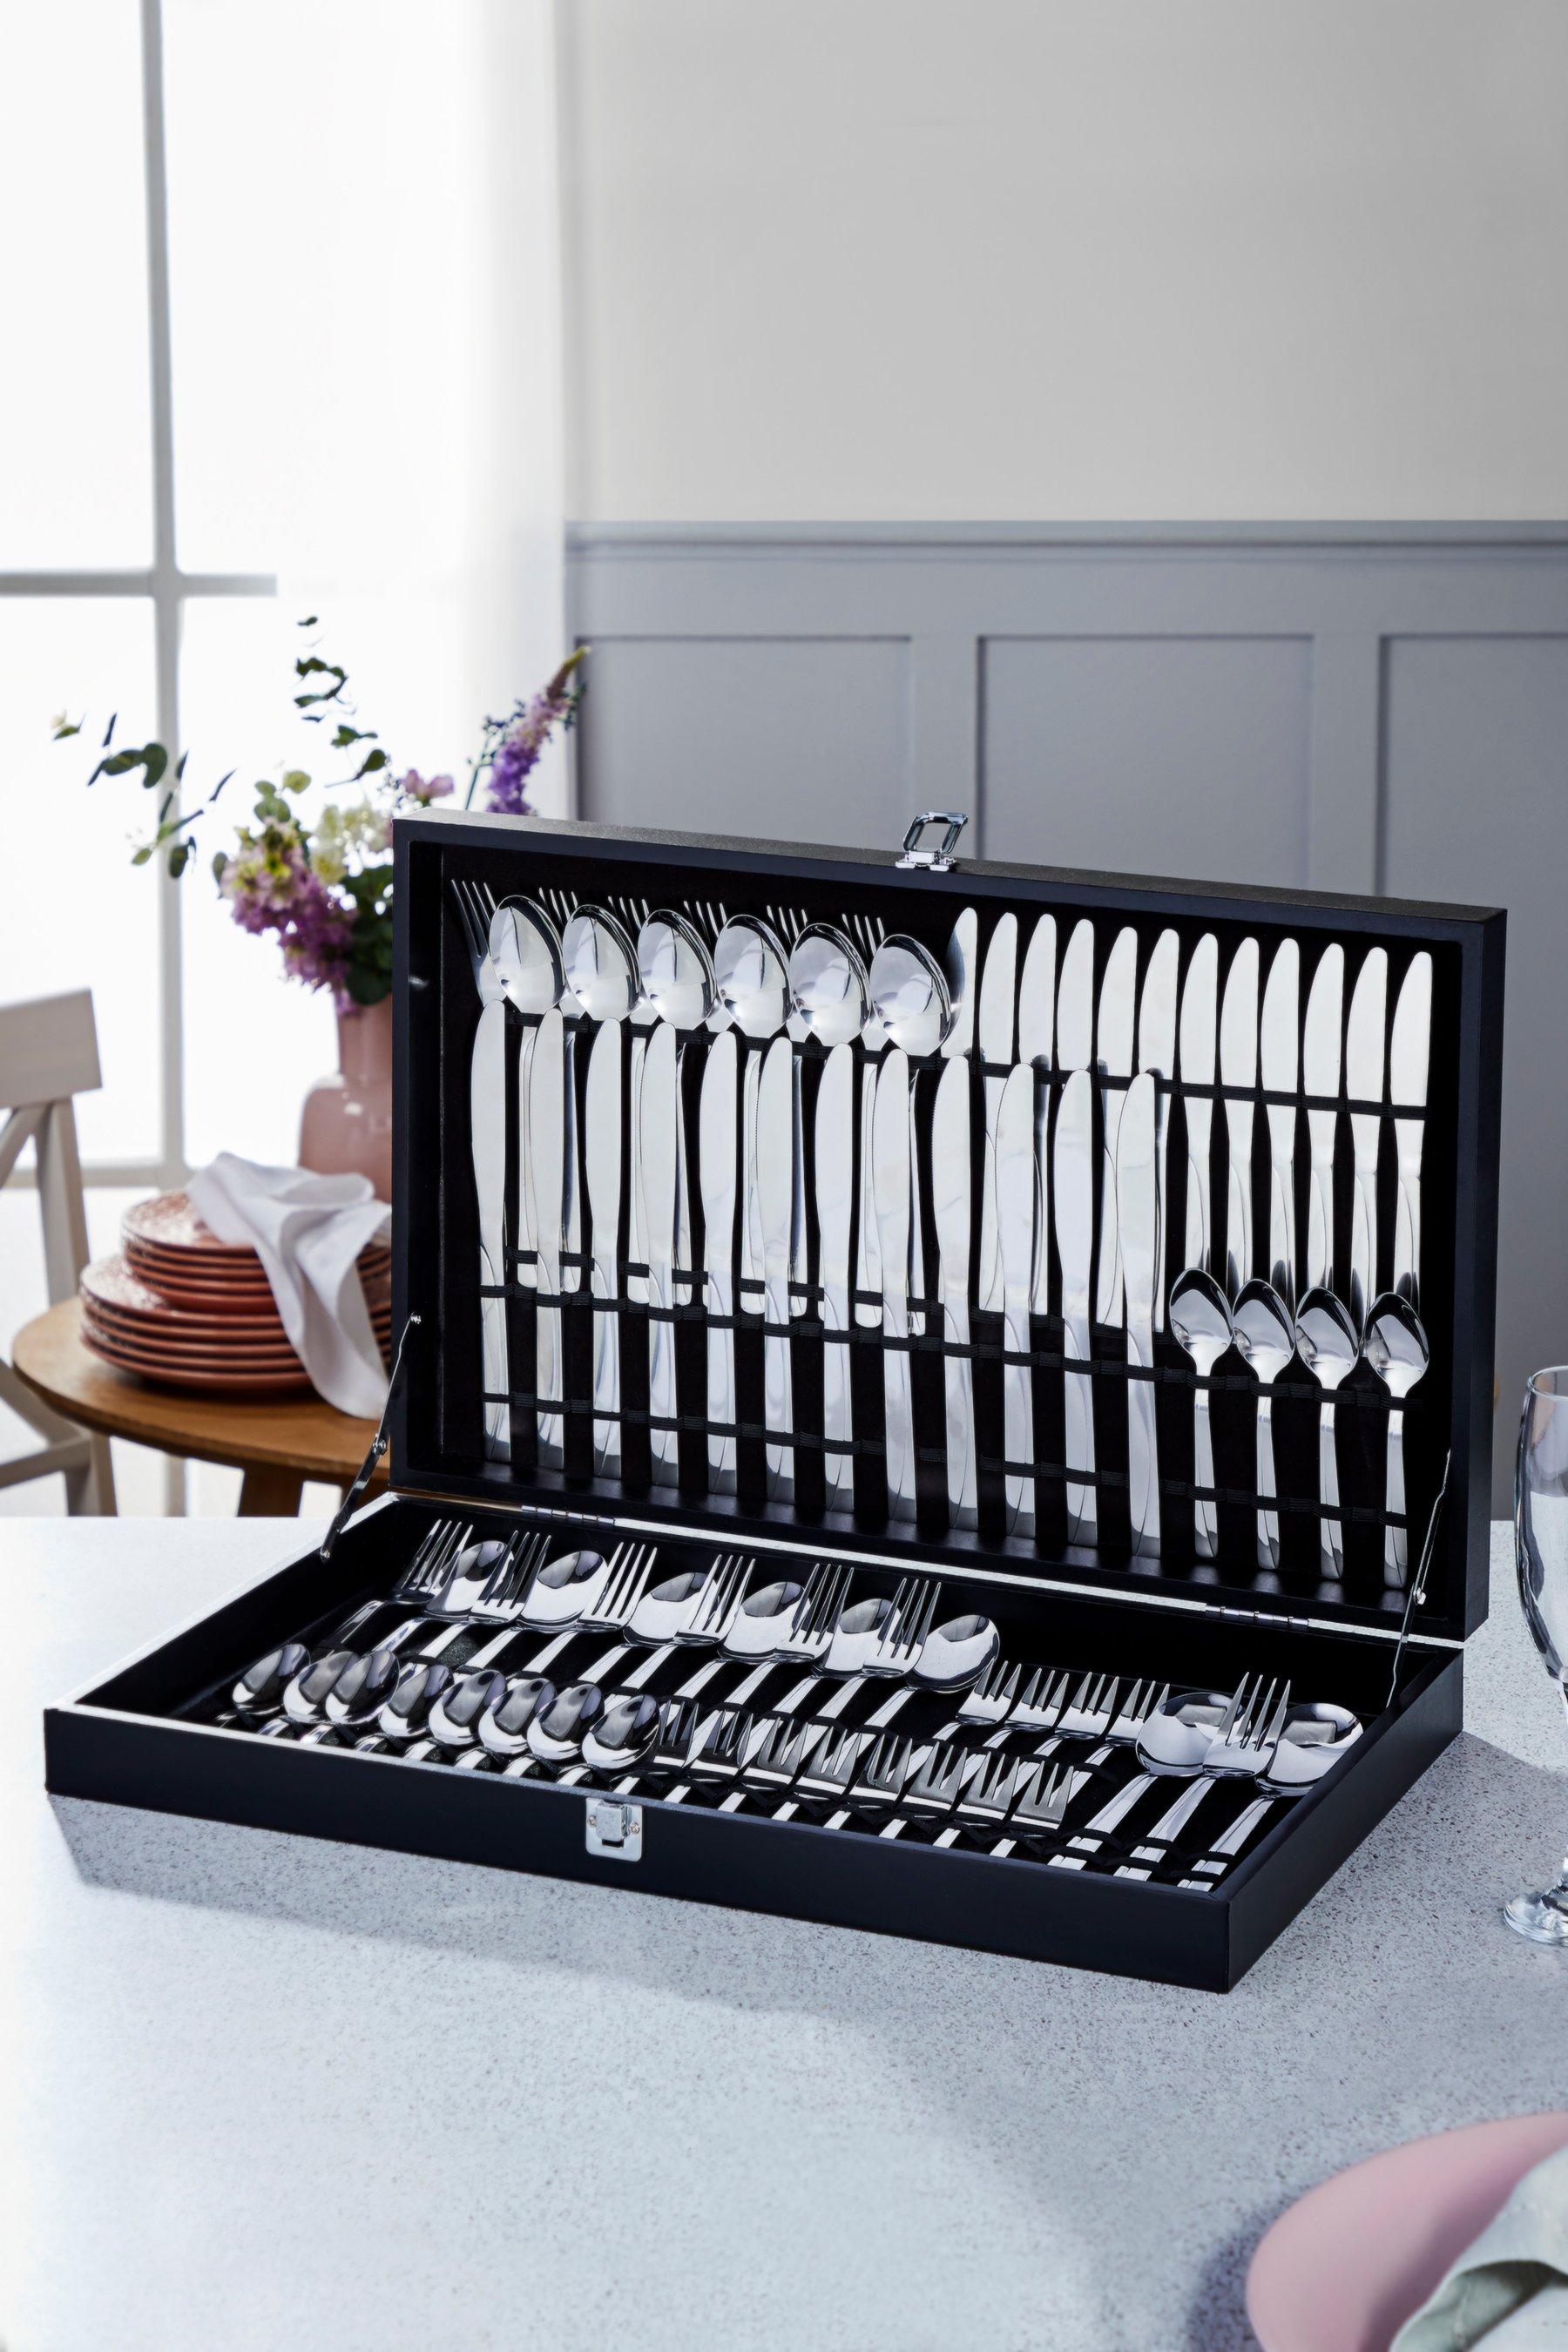 boxed cutlery set